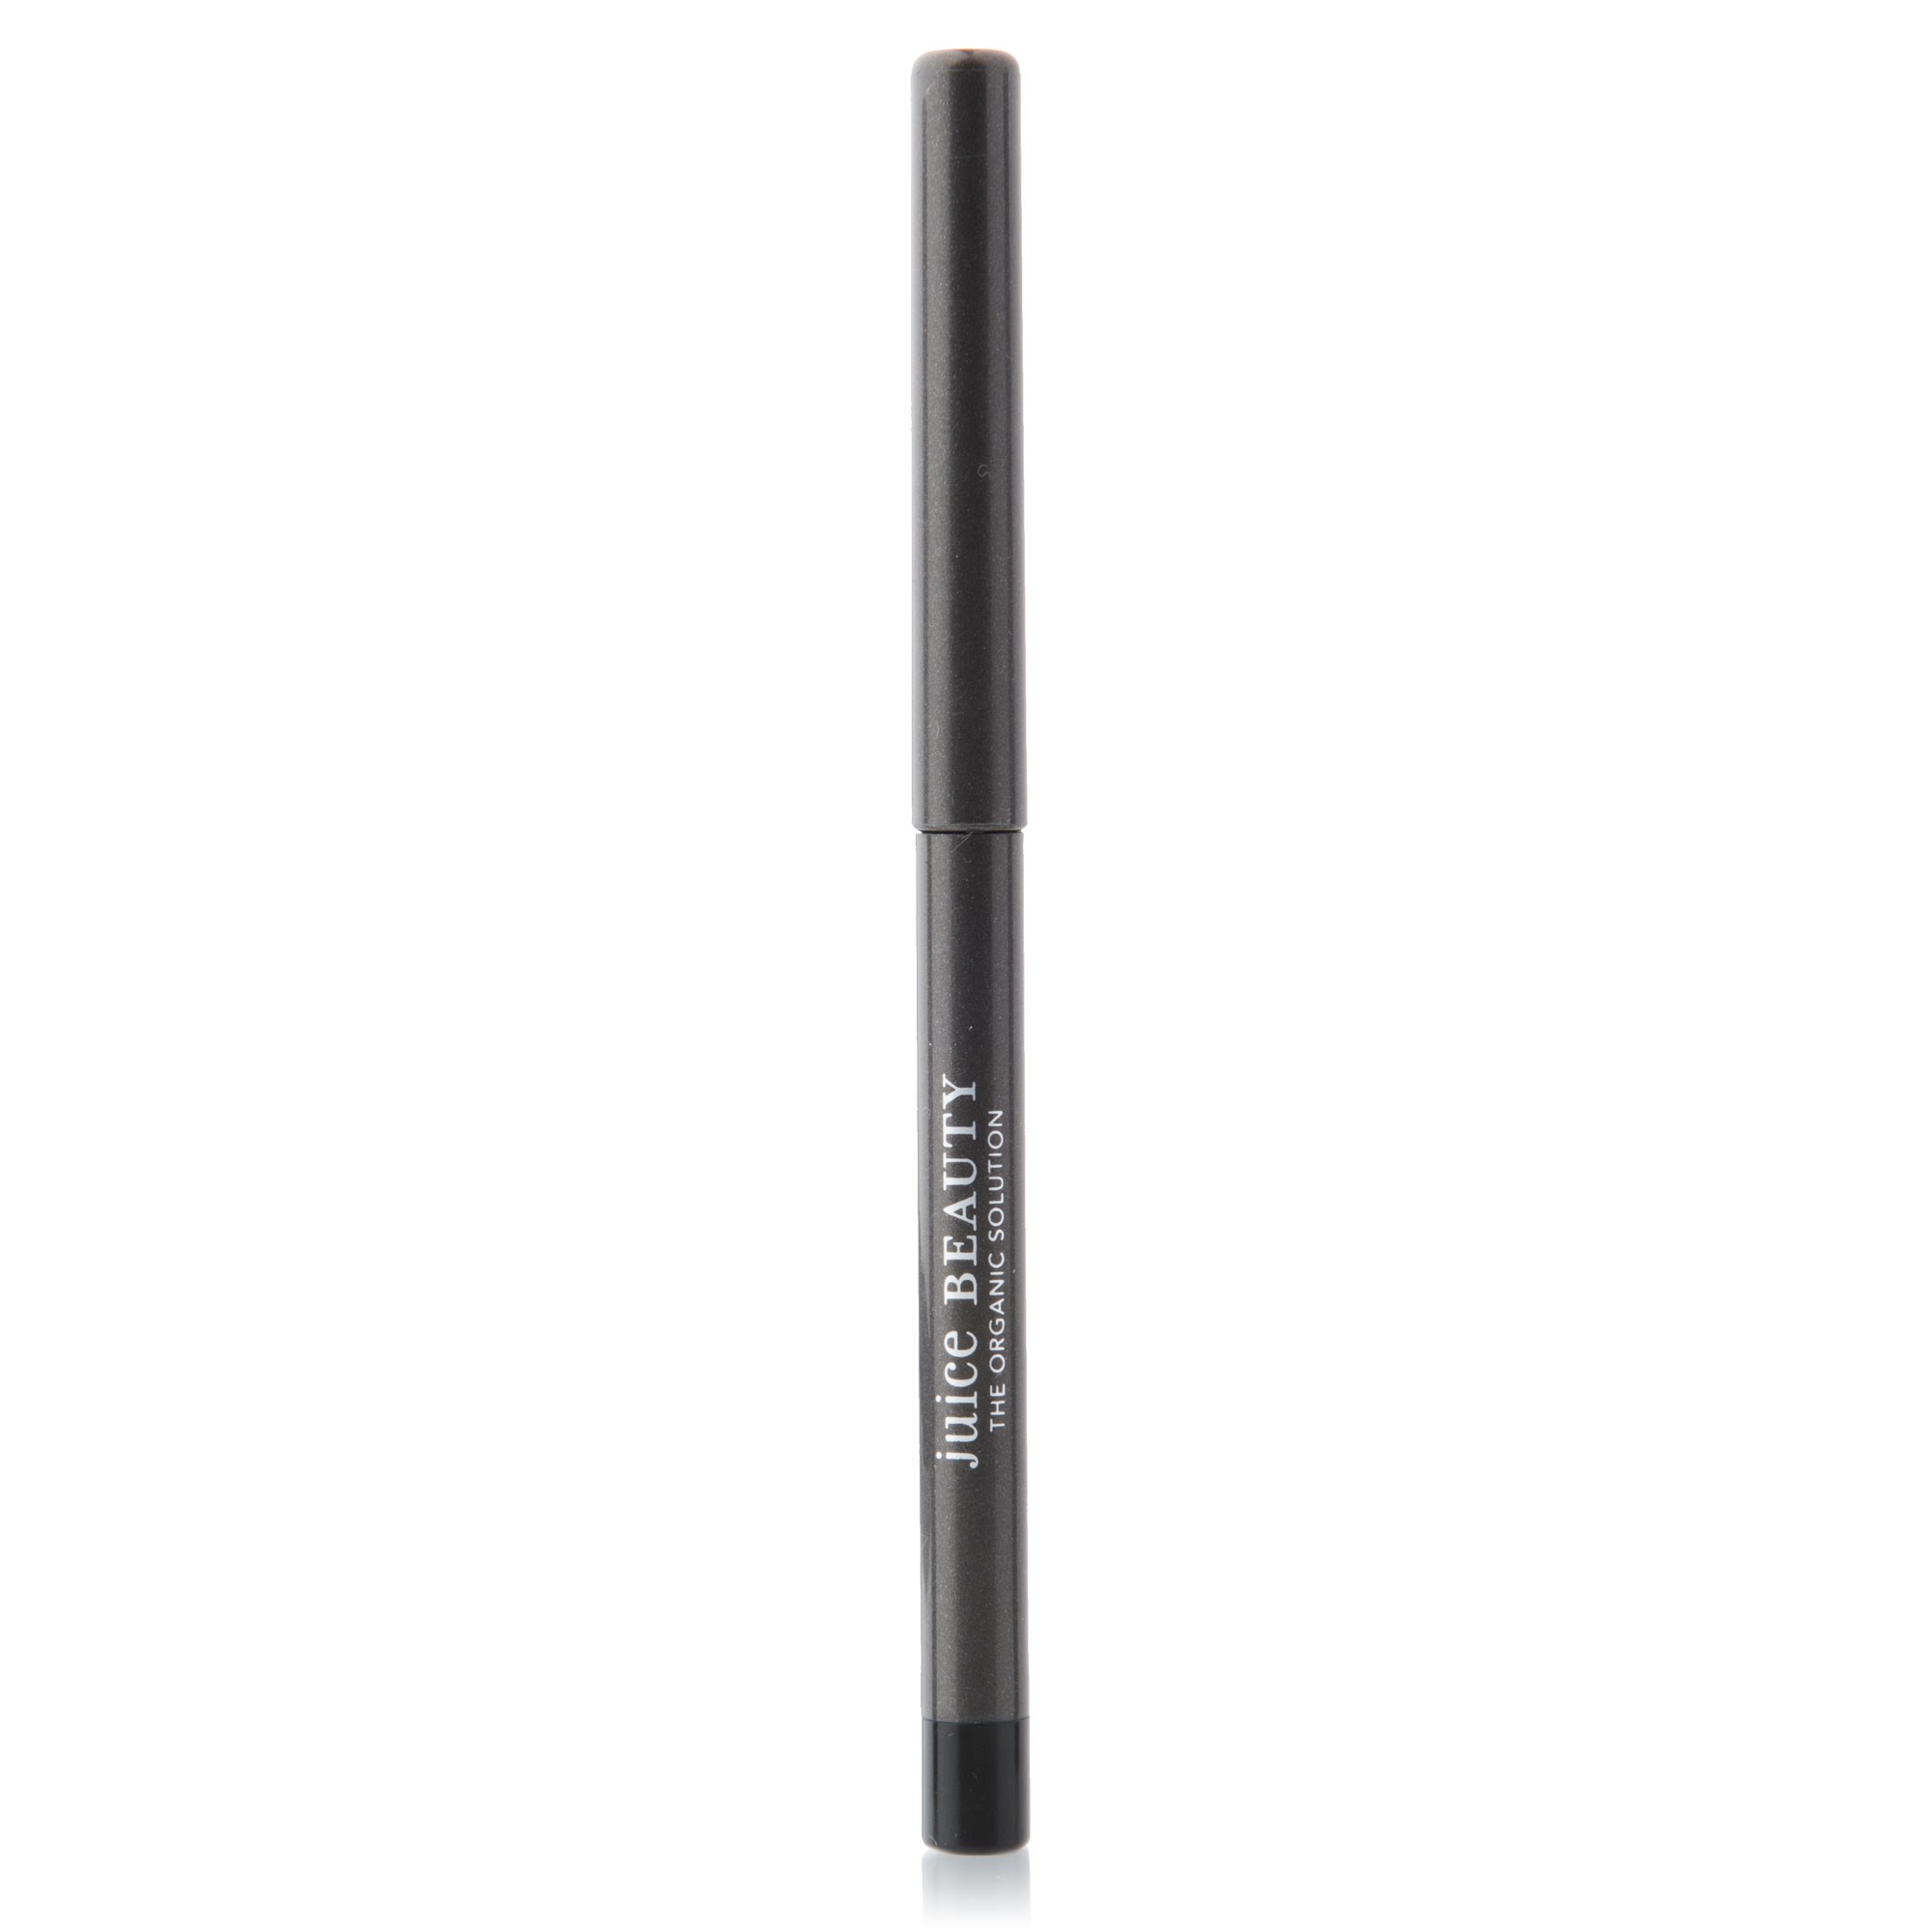 Juice Beauty Phyto Pigments Precision Eye Pencil 04 Brown